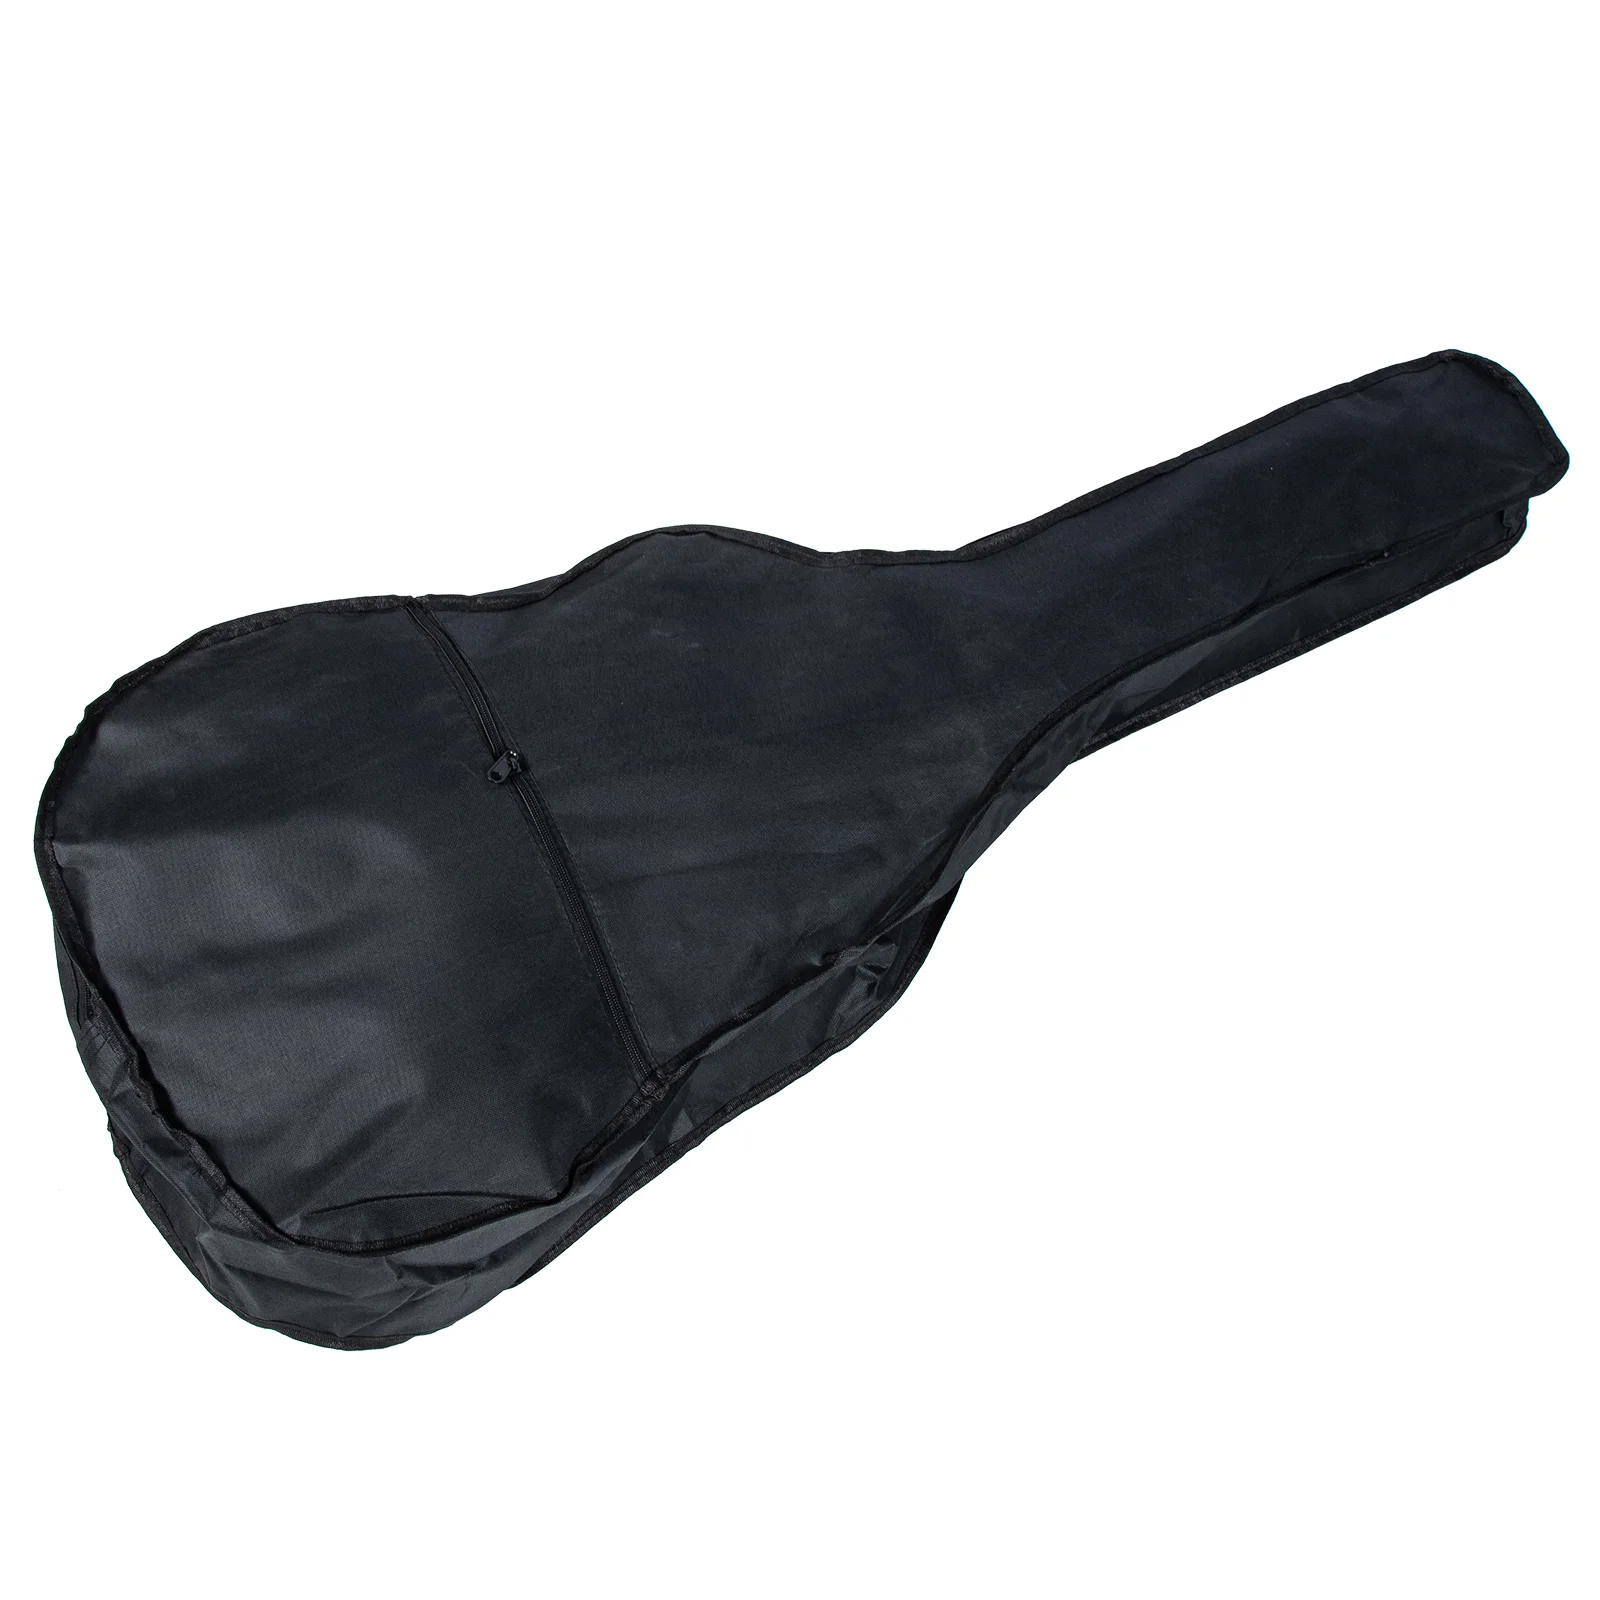 

Acoustic Guitar Bag Oxford Cloth Carry Instrument Pouch Handheld Carrying Tarp Waterproof Storage